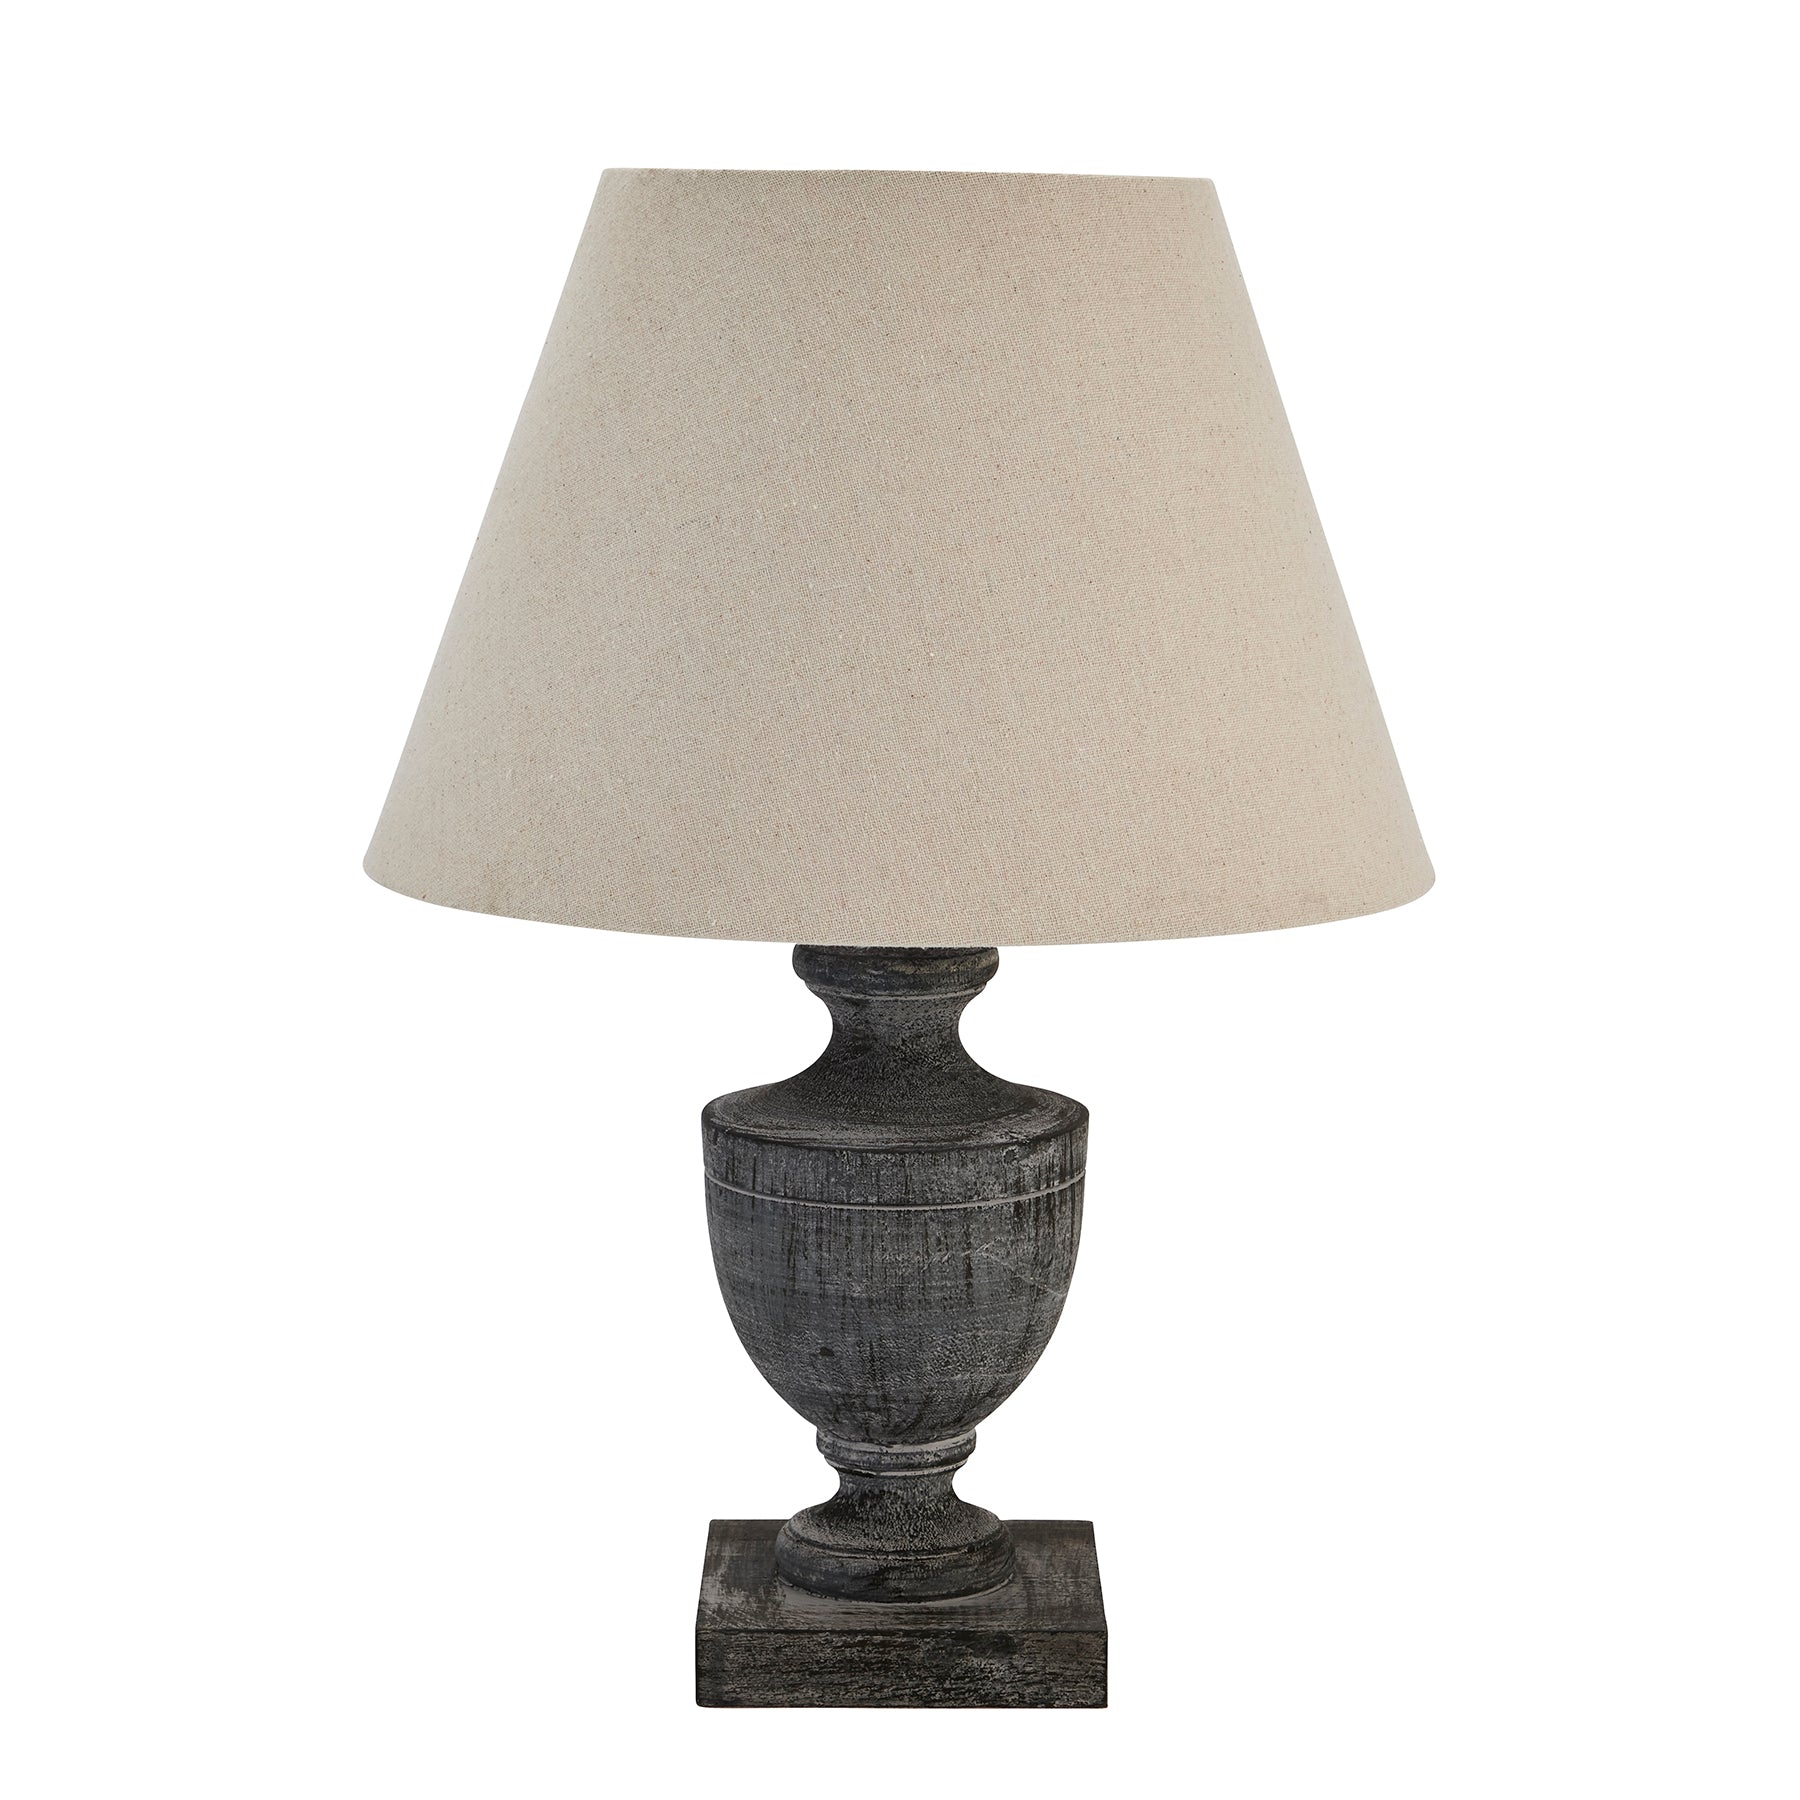 The Grecian Table Lamp